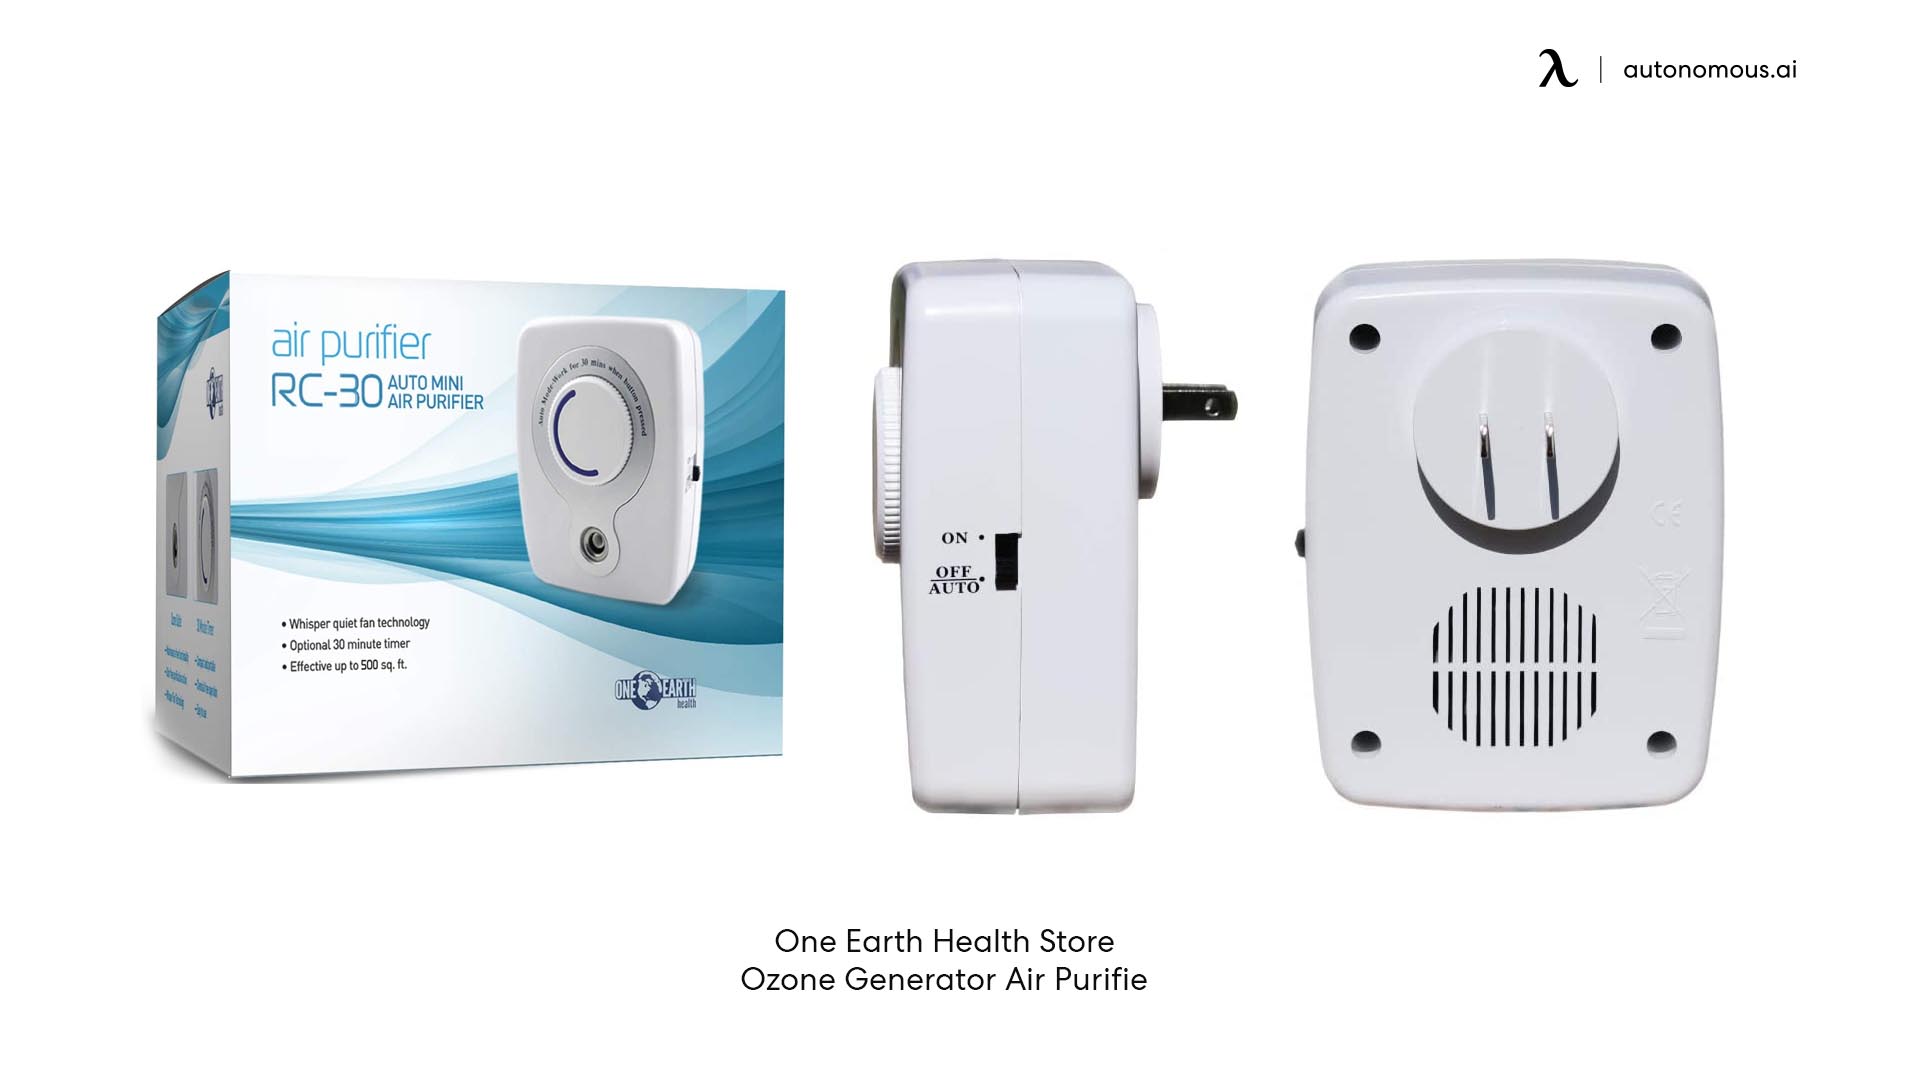 Ozone types of air purifier